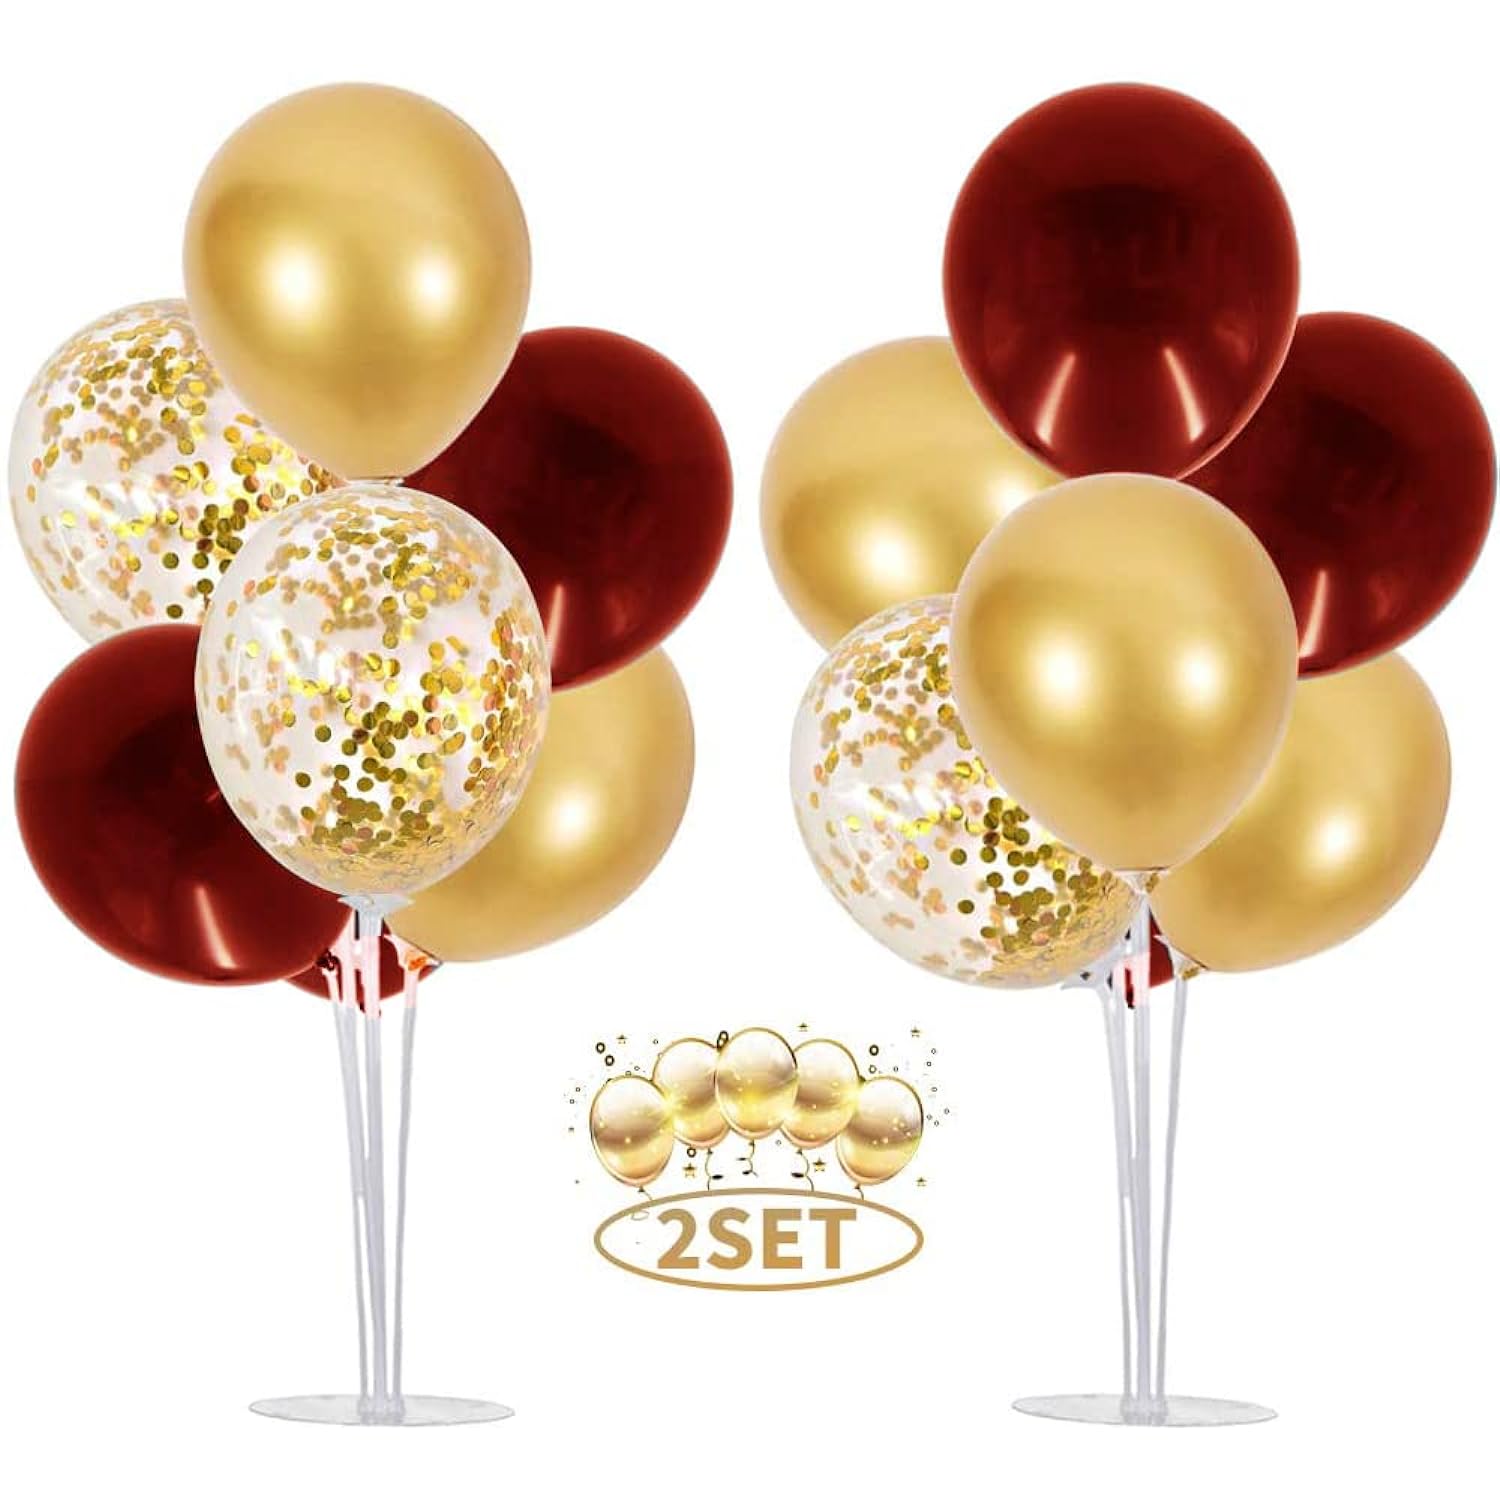 EBD Products Burgundy Gold Balloons 2 Set Table Centerpiece Balloons Stand Kit 15Pcs Burgundy Gold Balloons For F SEA8188344